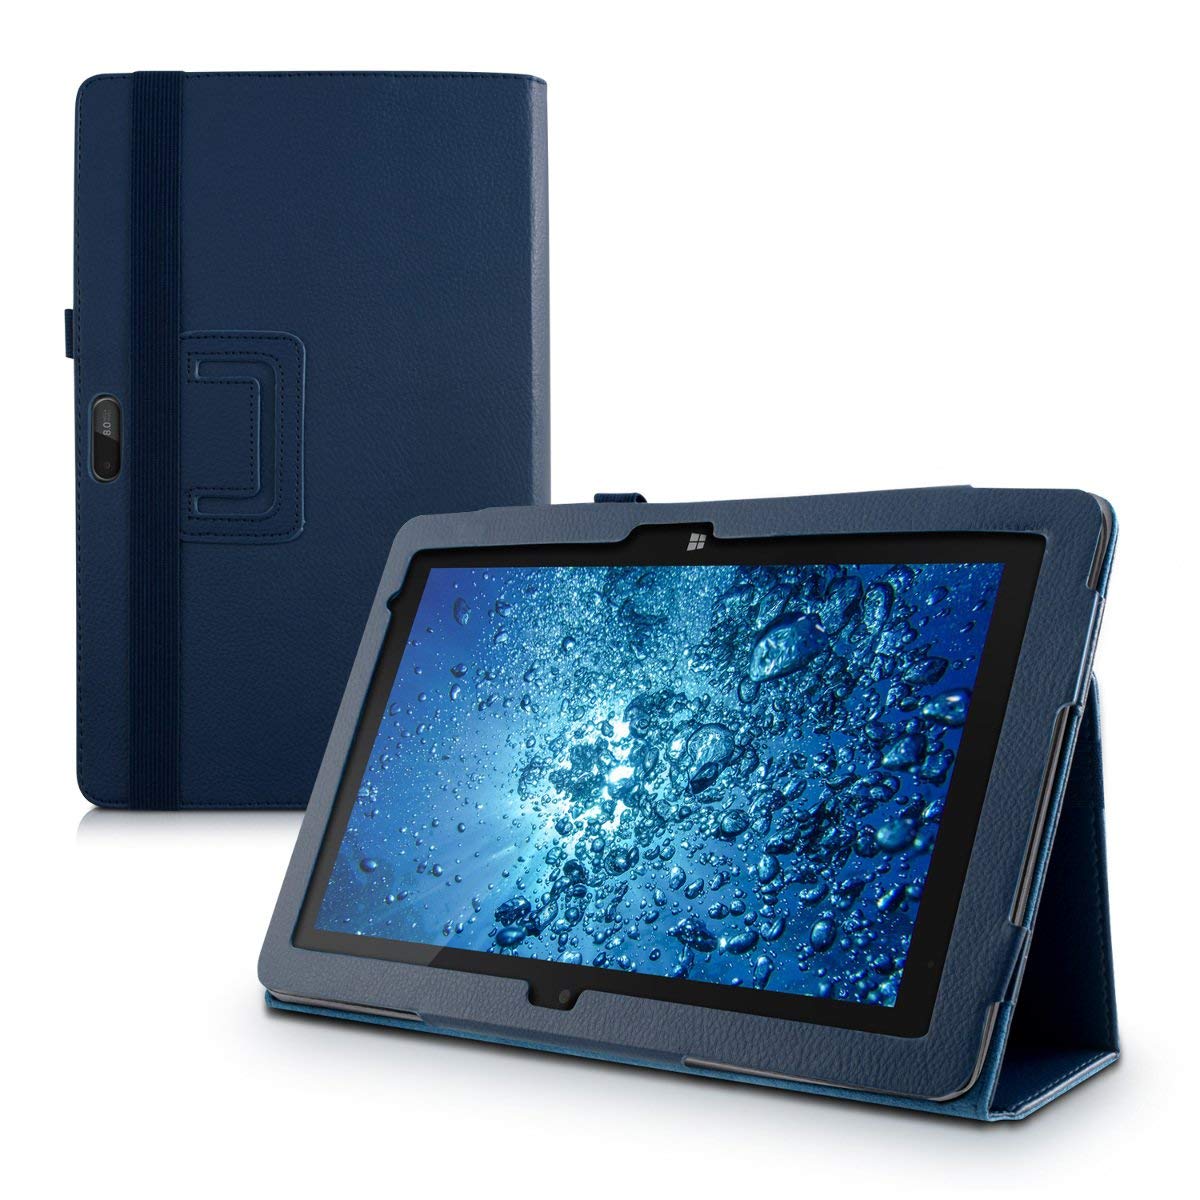 kwmobile Elegant synthetic leather case for Dell Venue 11 Pro 5000 in dark blue with convenient STAND FEATURE